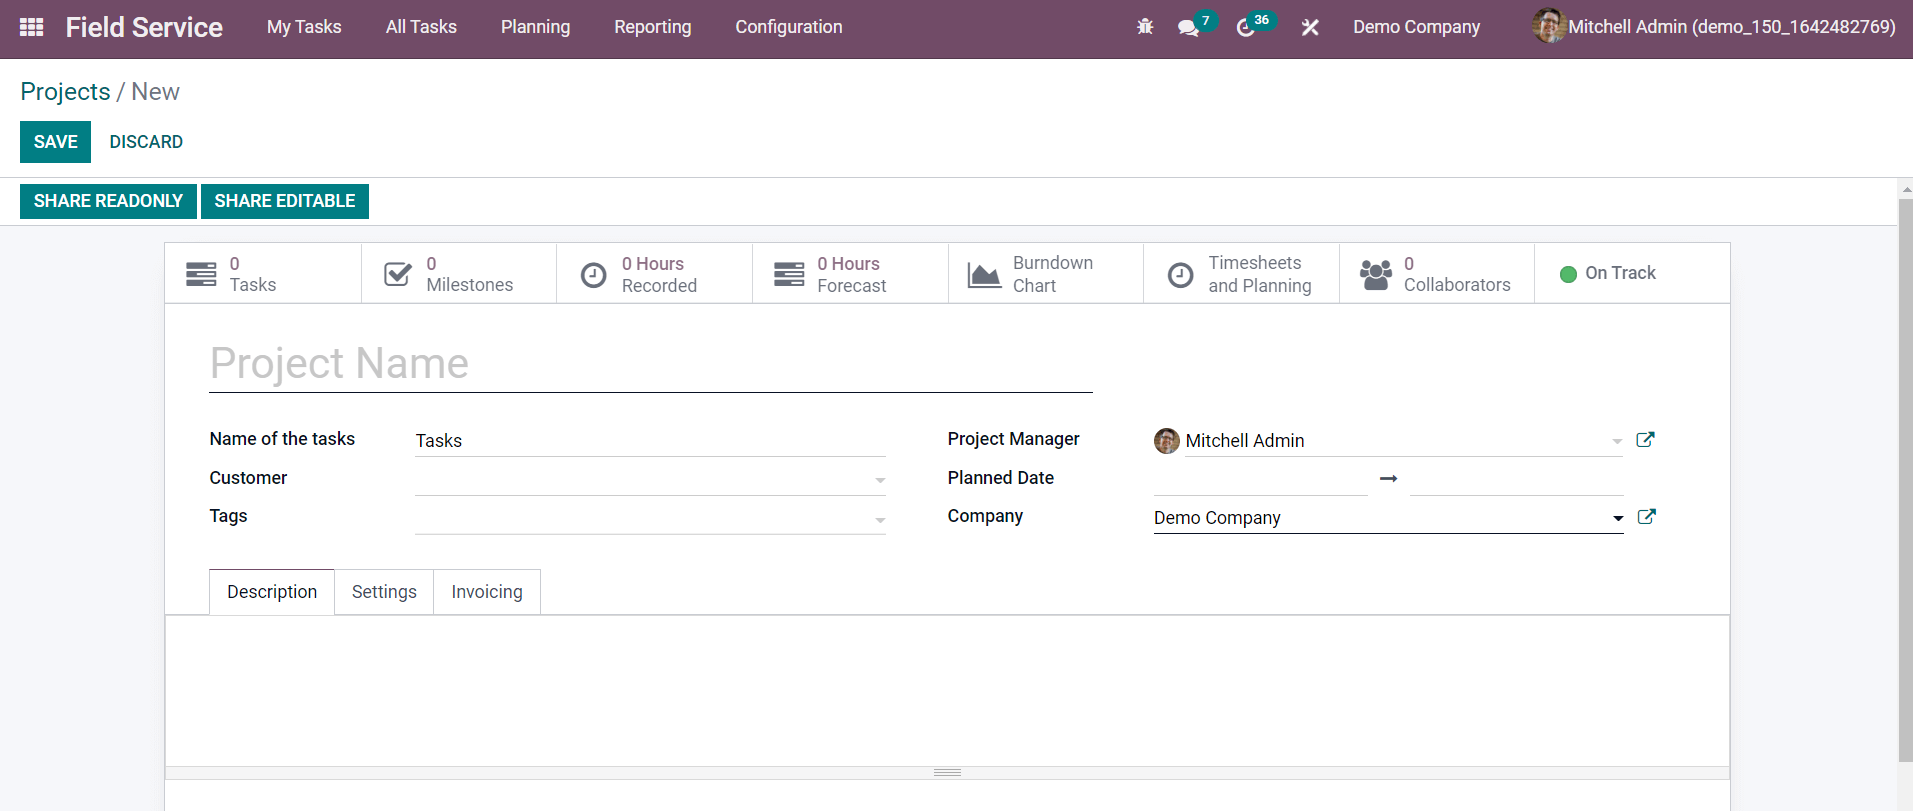 odoo-15-field-service-management-features